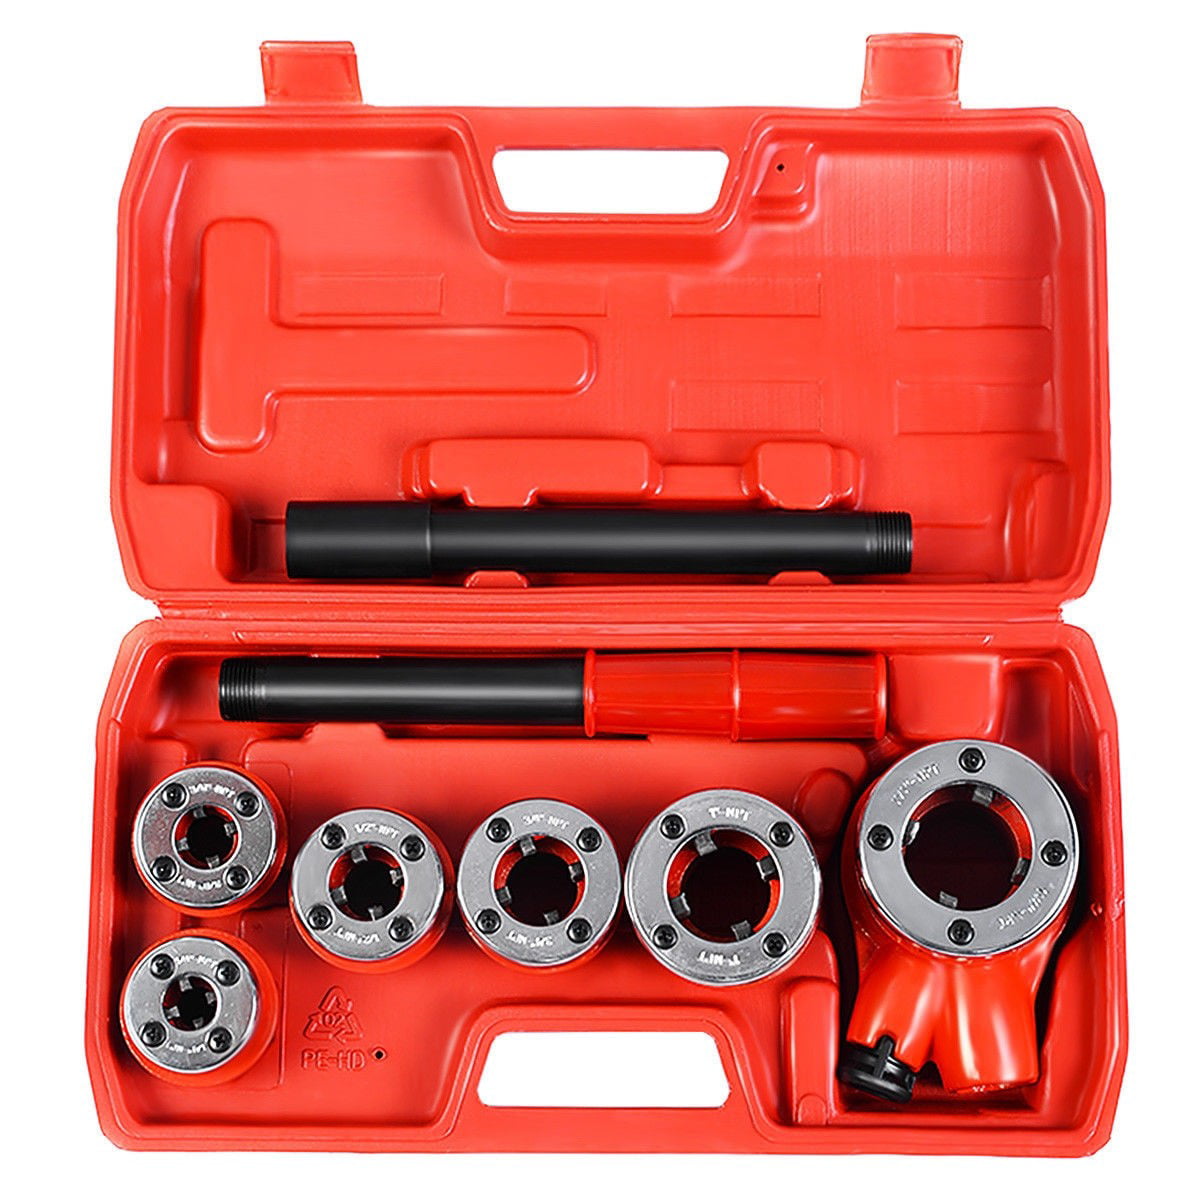 New Ratchet Pipe Threader Kit Set Ratcheting w/5 Dies and Case Gas FREE SHIPPING 